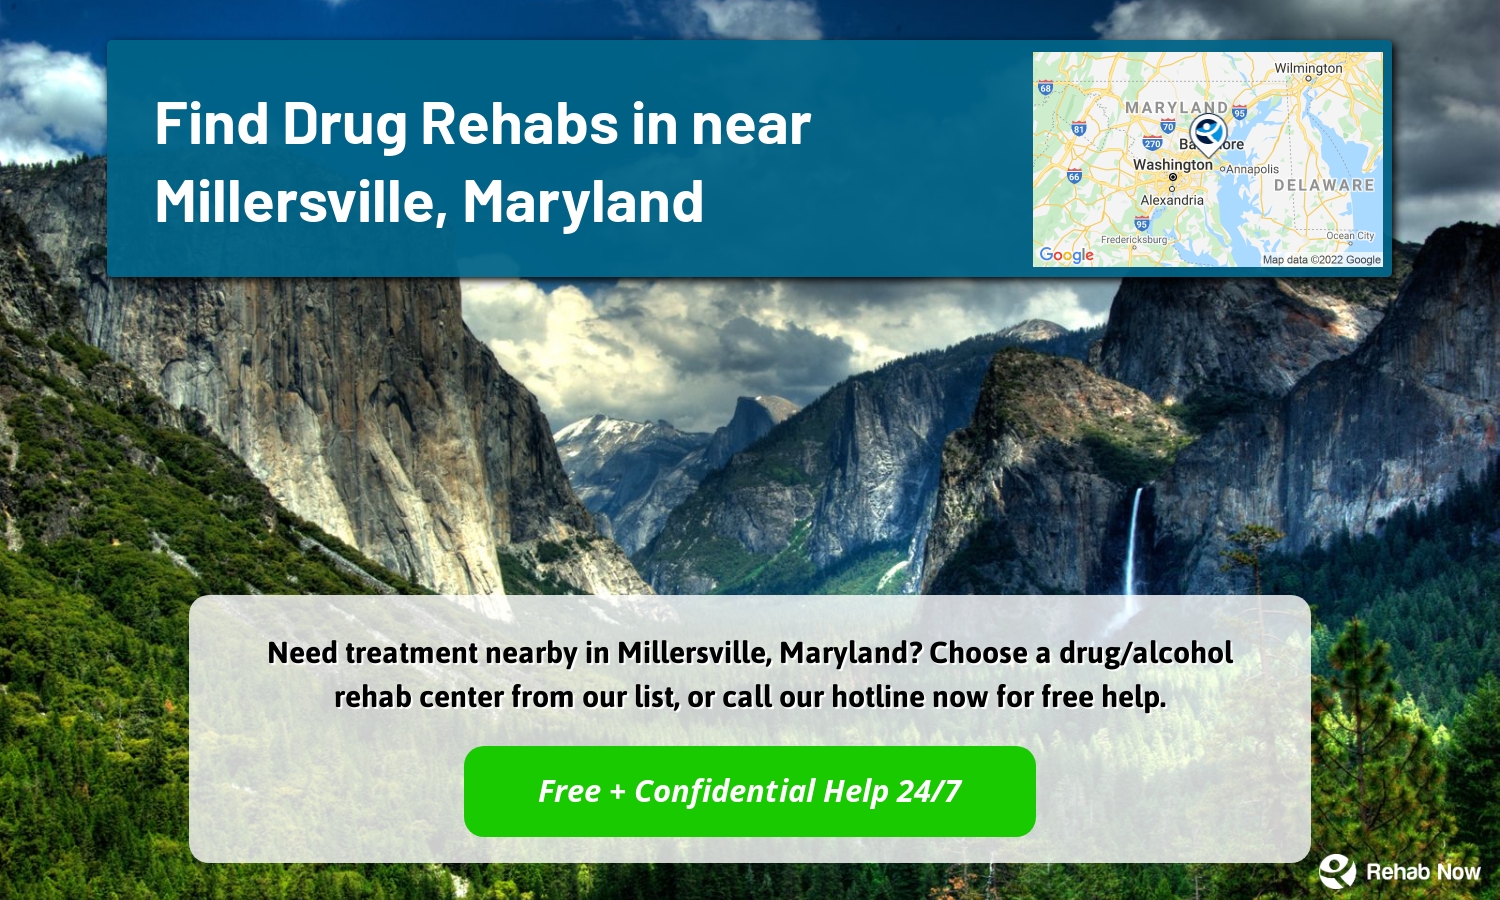 Need treatment nearby in Millersville, Maryland? Choose a drug/alcohol rehab center from our list, or call our hotline now for free help.